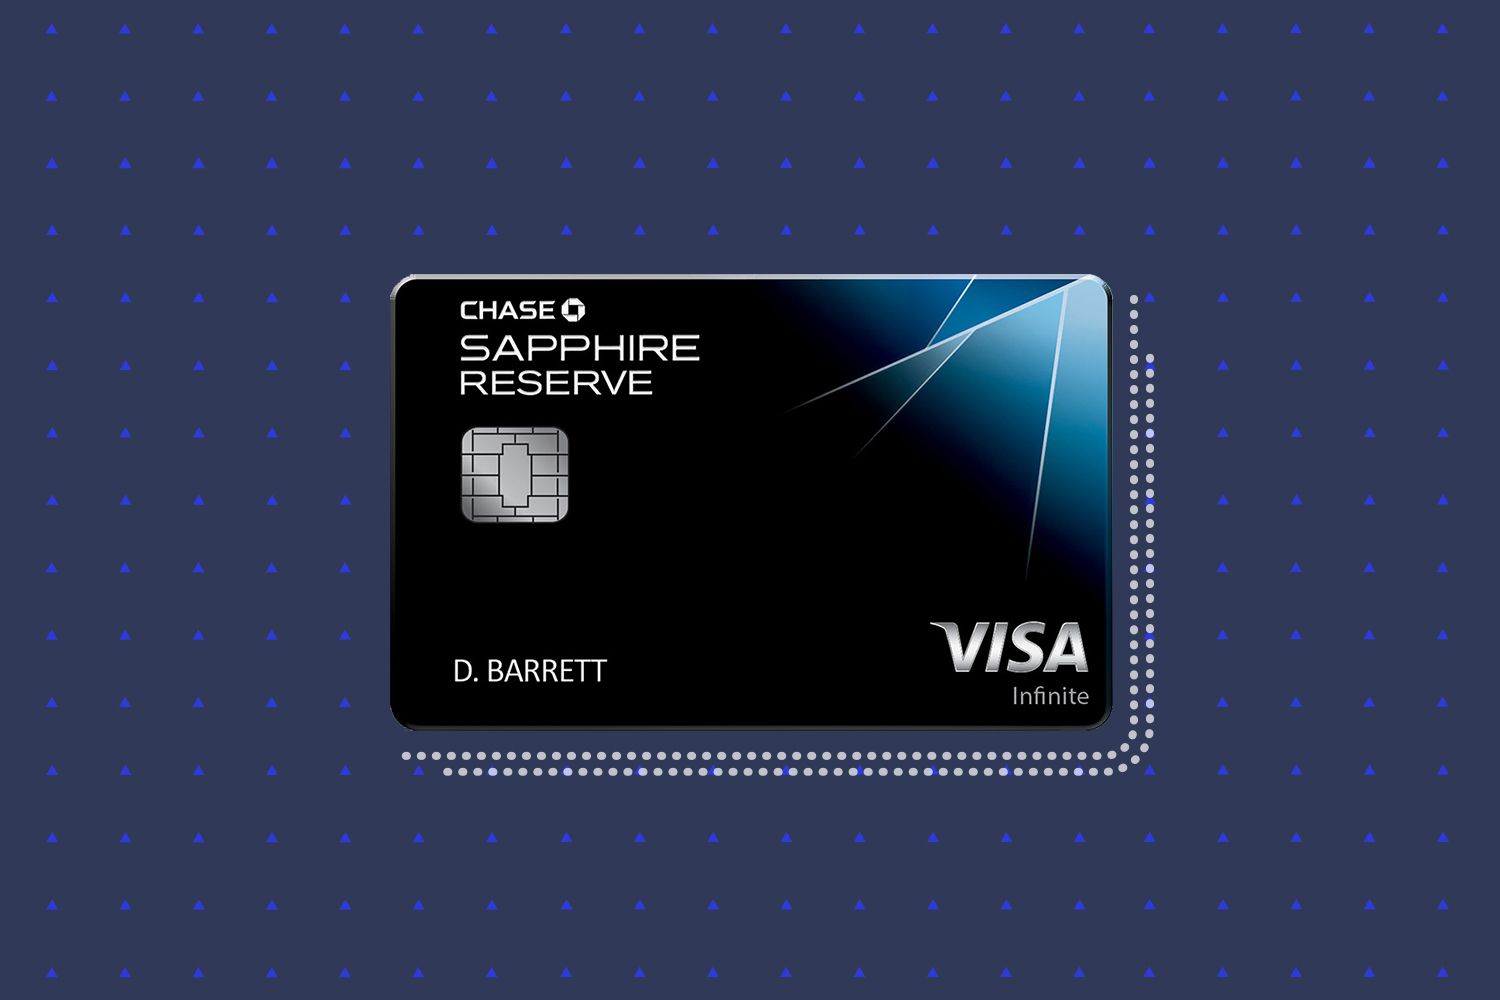 Chase Sapphire Reserve® is a high-end credit card.